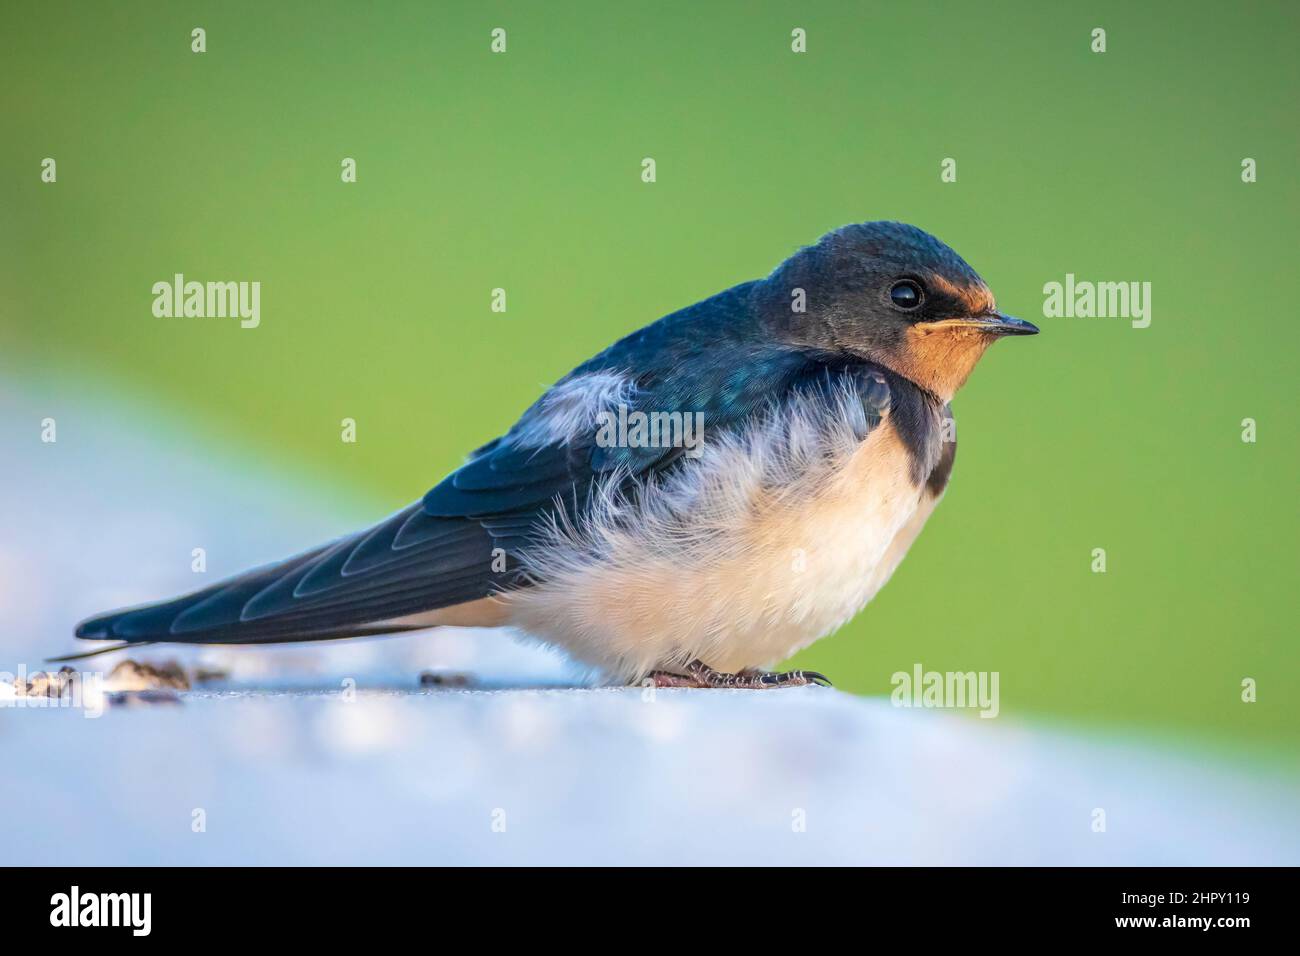 Closeup of a Barn Swallow Hirundo rustica resting. This is the most widespread species of swallow in the world and the national bird of Estonia. Stock Photo